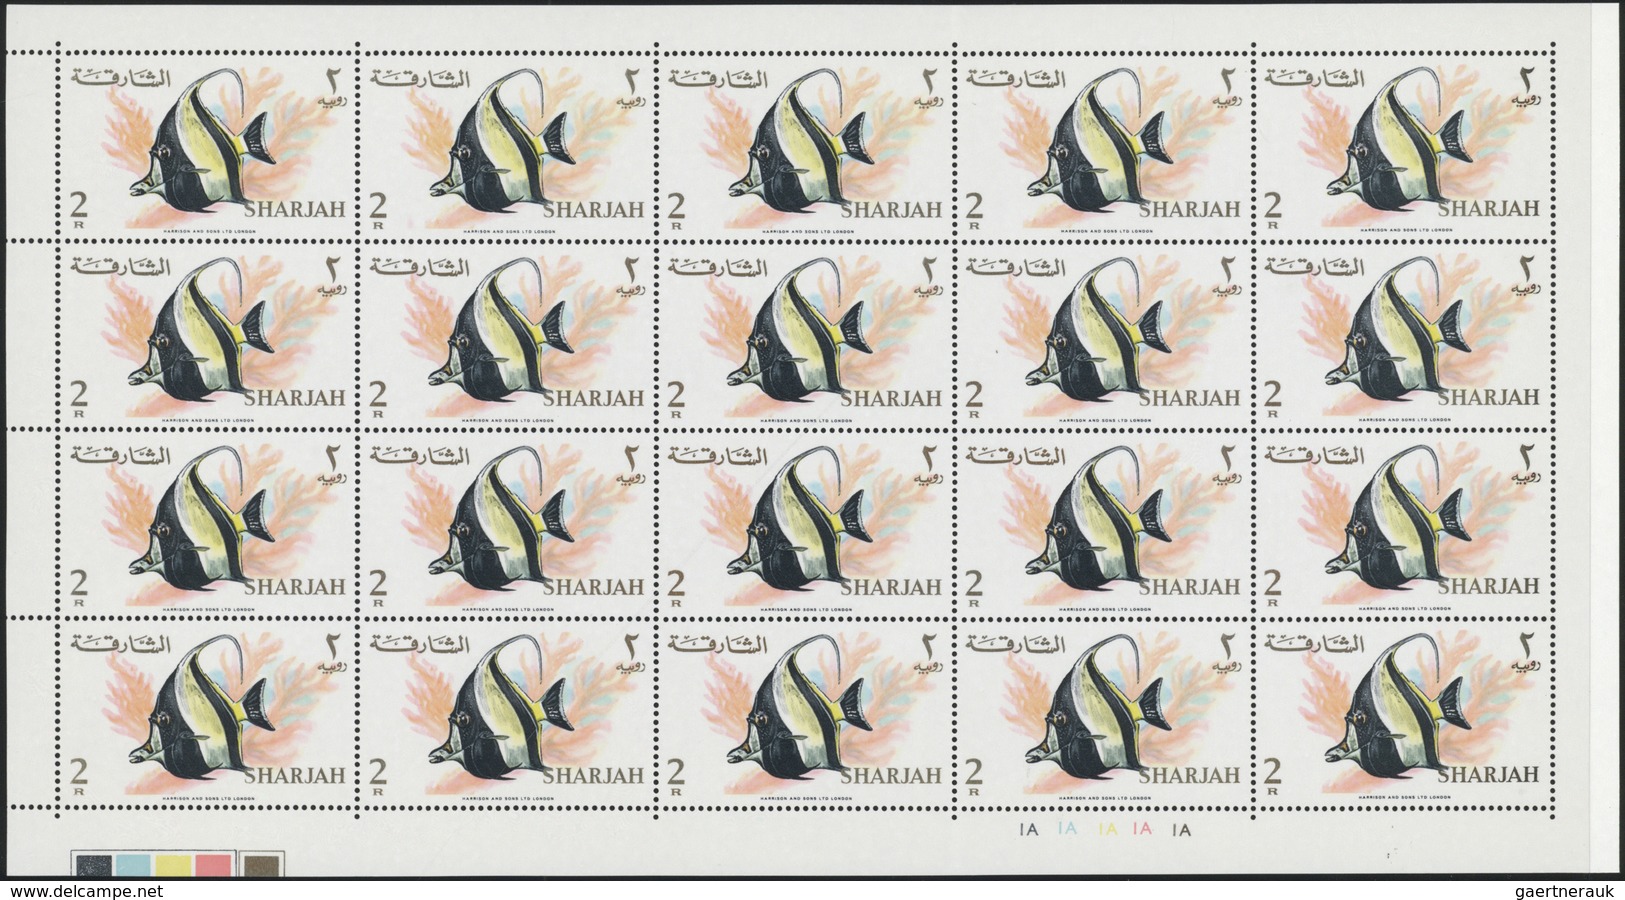 09754 Schardscha / Sharjah: 1966, Fishes, 1np. to 10r., complete set of 17 values as (folded) sheets of 20